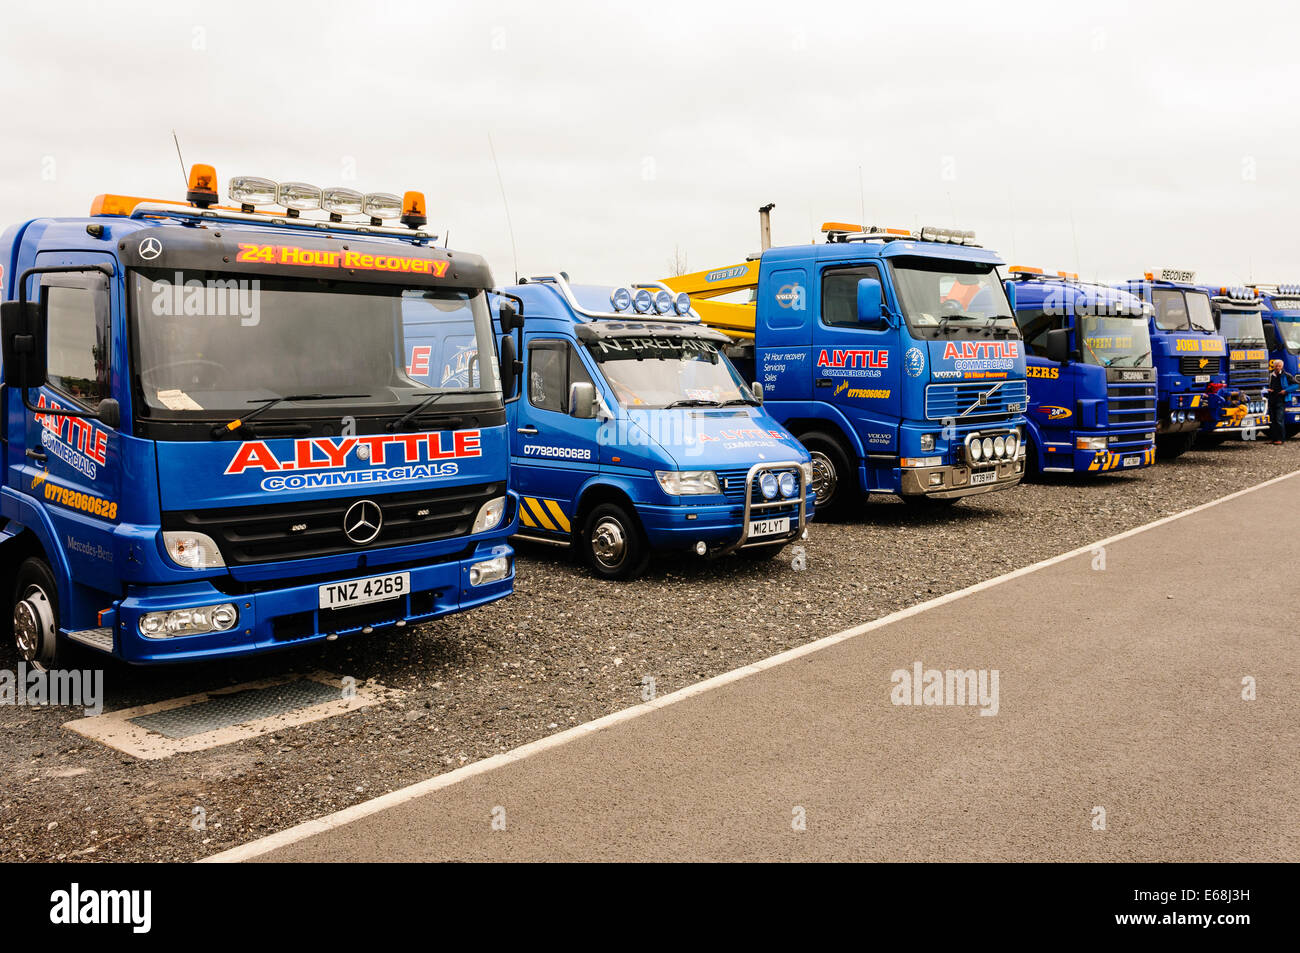 A row of recovery tow trucks parked up Stock Photo